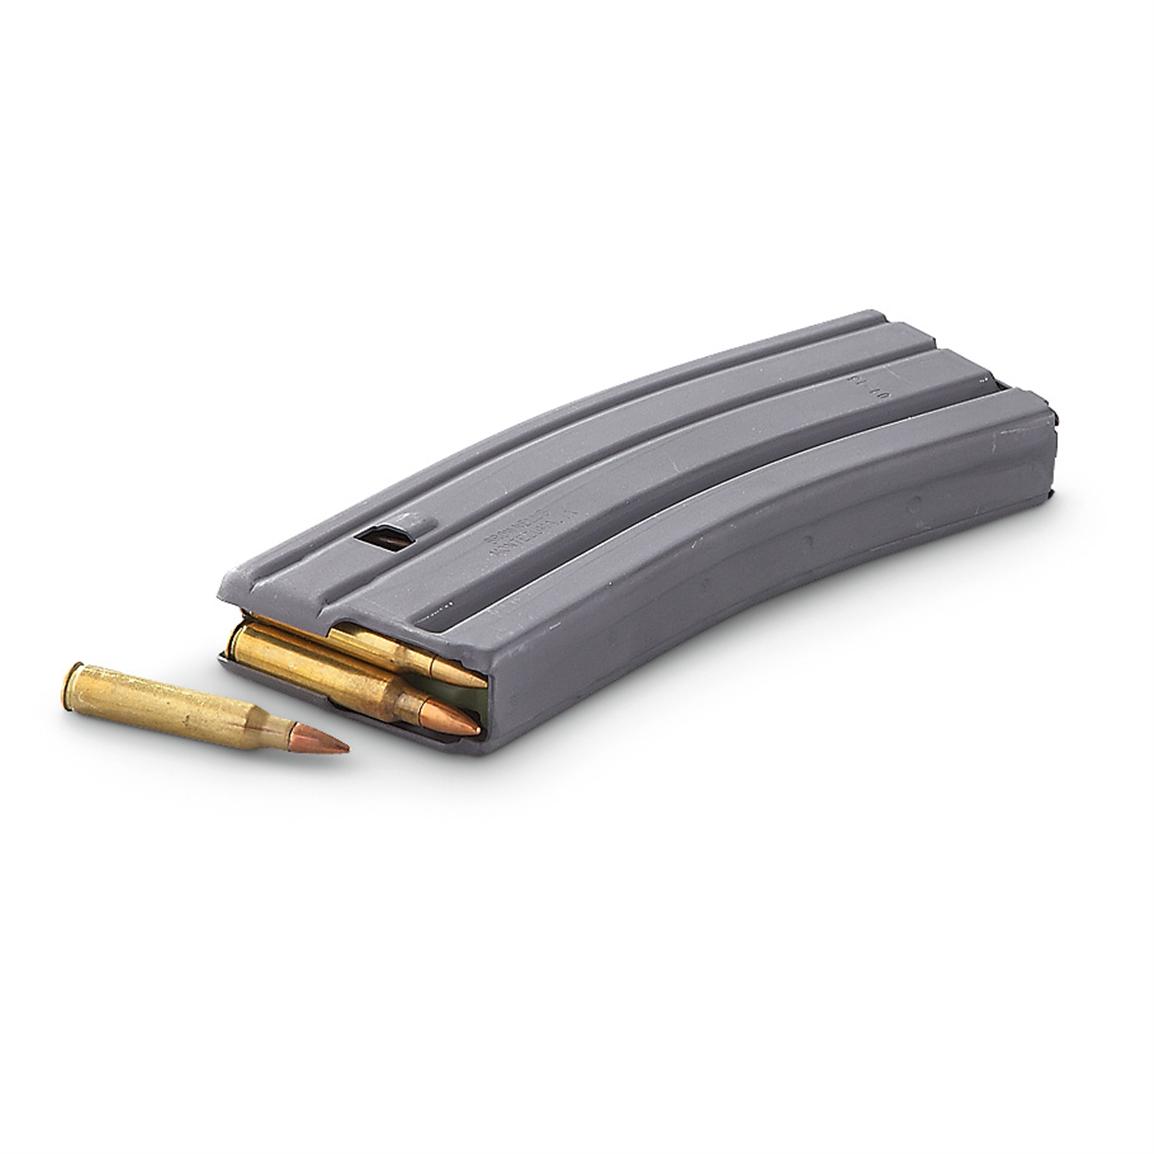 Brownells AR15/M16 Military Spec Magazine, 30 Rounds 124775, Rifle